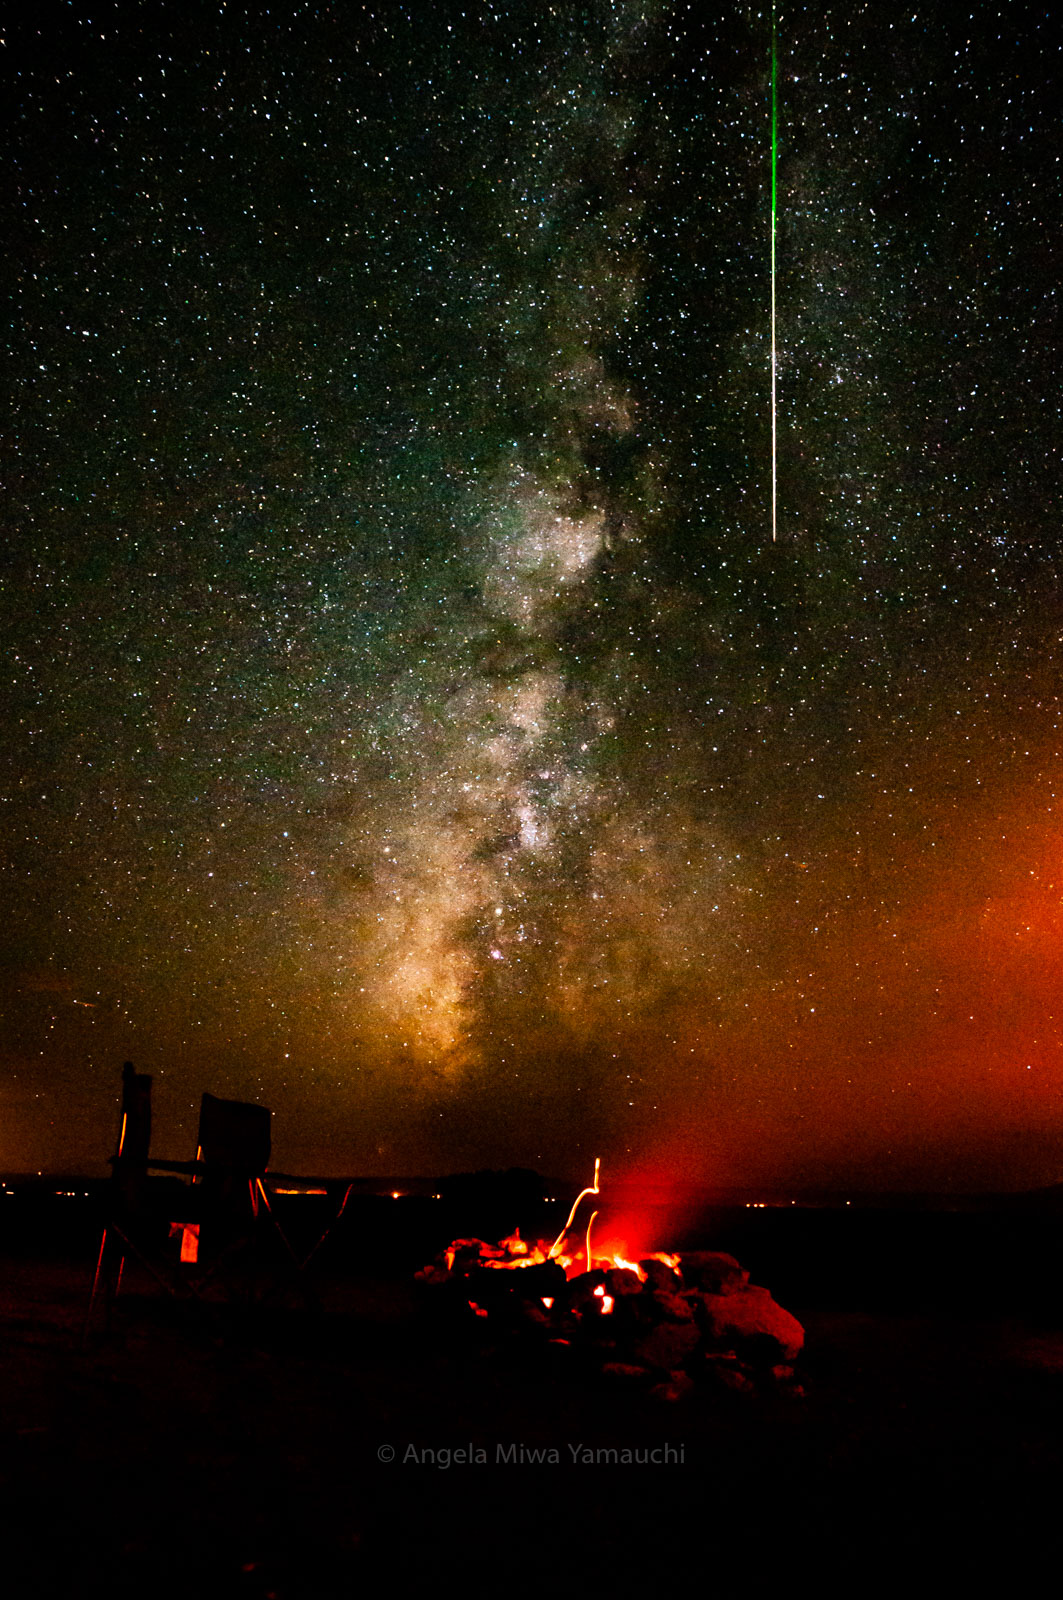 Meteor, Milky Way, and Fire